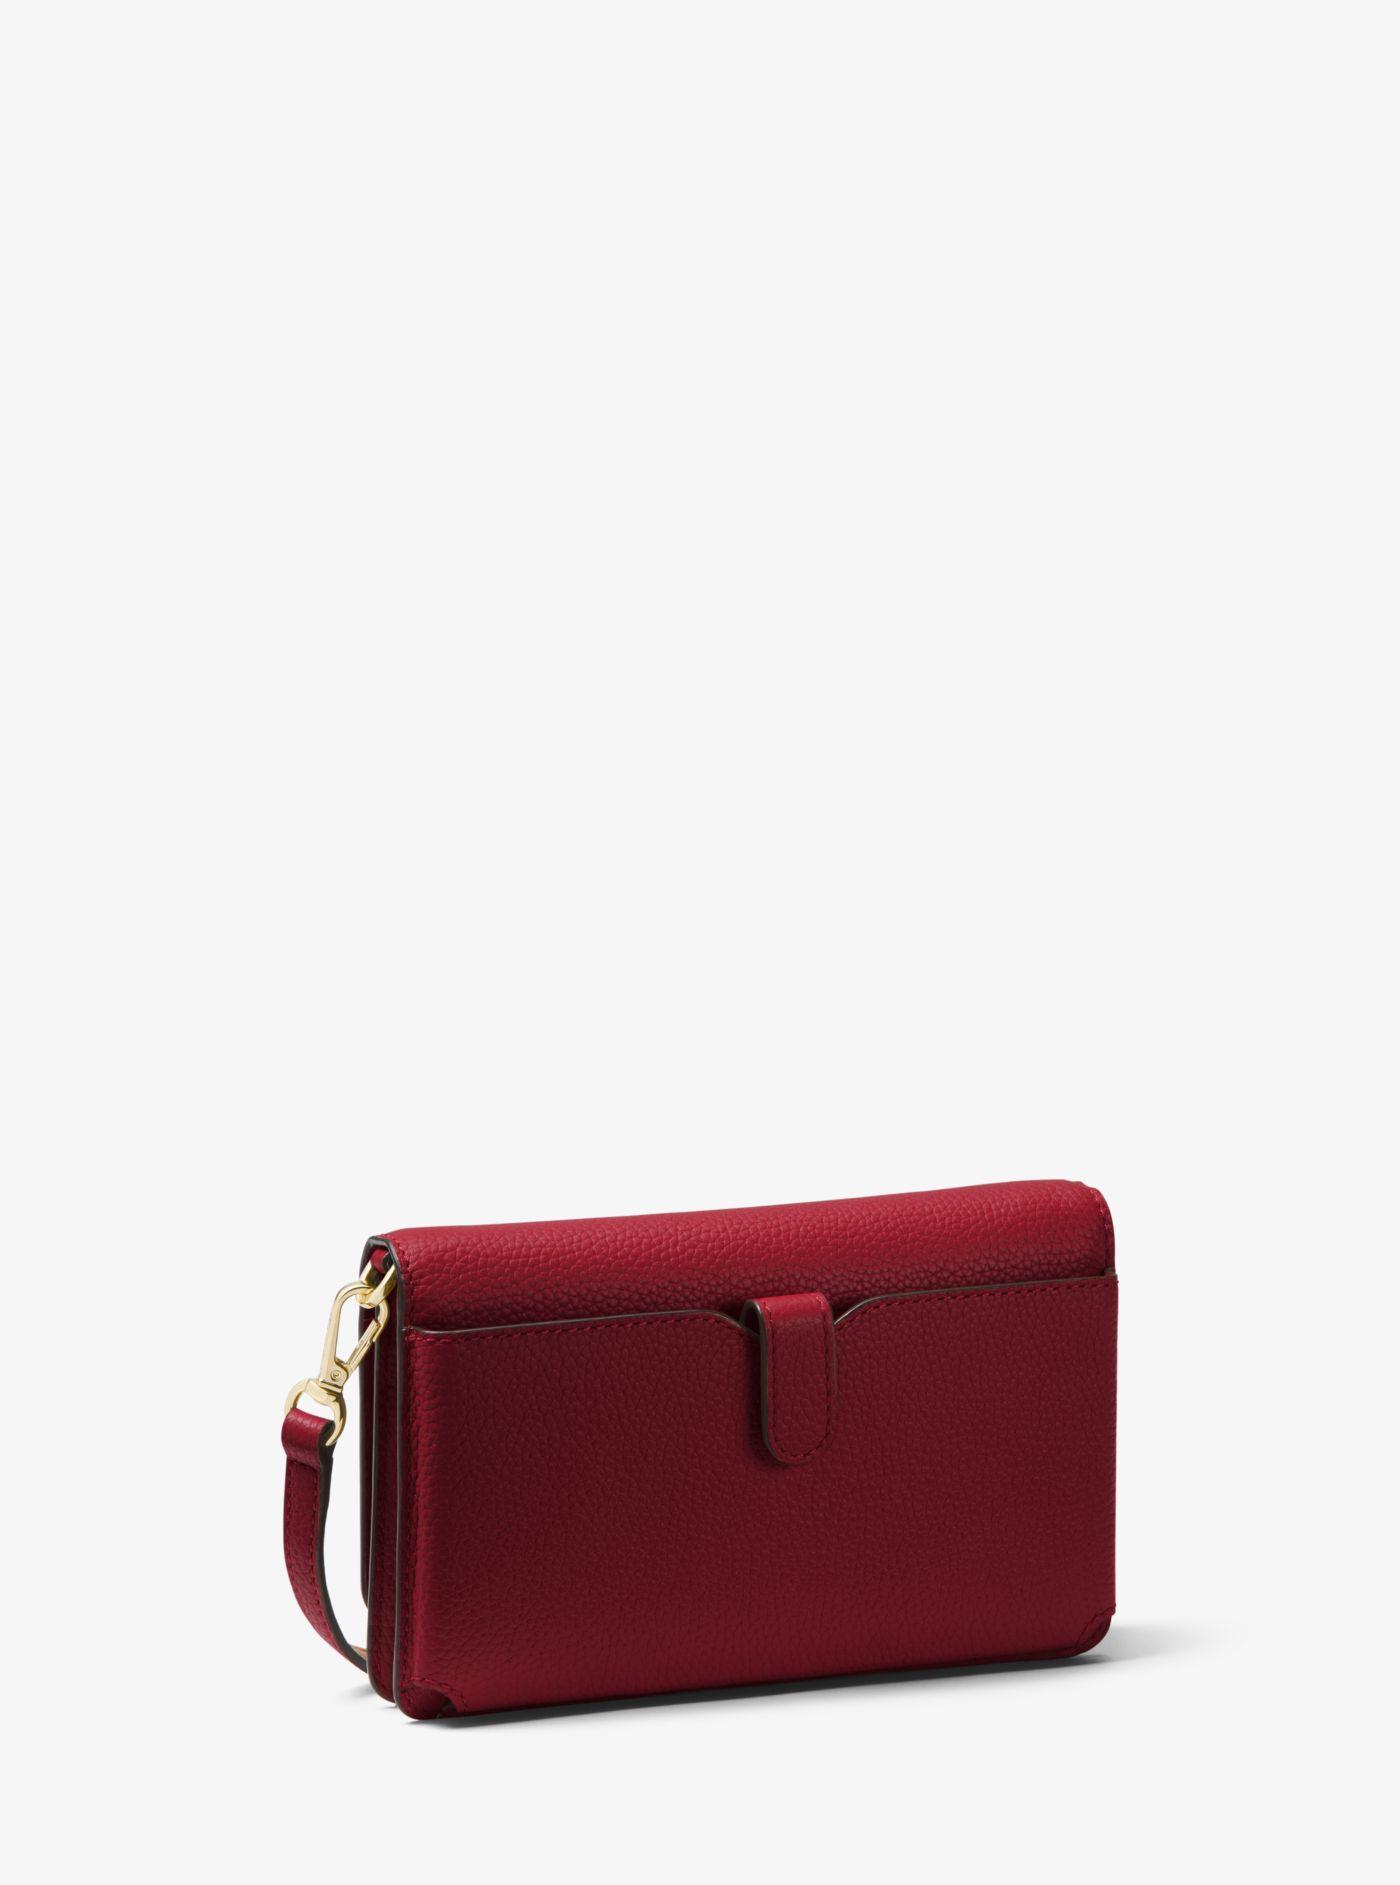 MICHAEL Michael Kors Pebbled Leather Phone Crossbody Bag in Red - Lyst